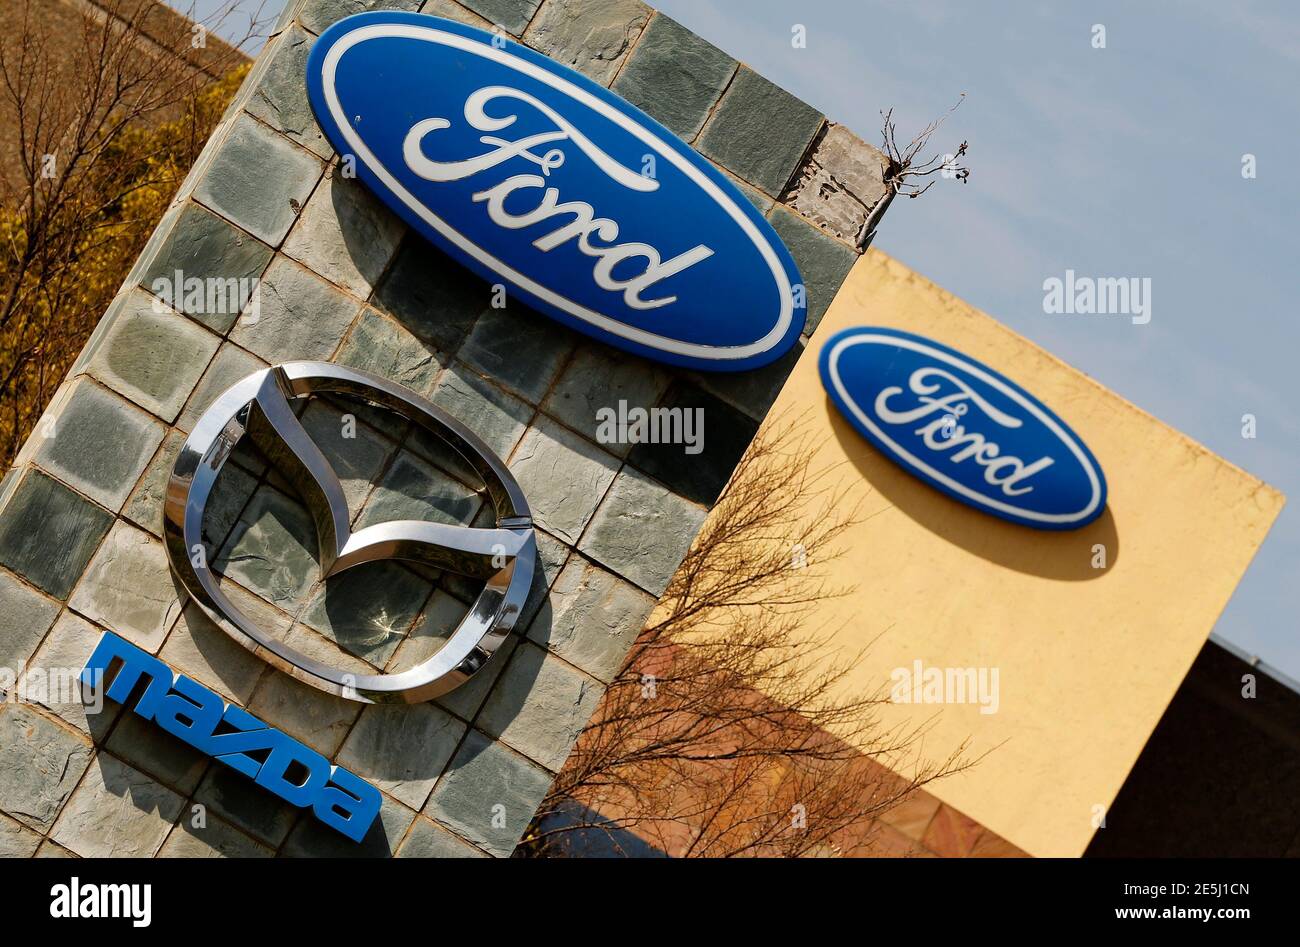 The logos of Ford and Mazda Motor Co are seen at the company's assembly plant in Pretoria July 18, 2014. Ford Motor Co announced 17 new vehicles for Sub-Saharan Africa on Thursday, as carmakers jostle for position in one of the last major markets where potential growth remains largely untapped. The models, among 25 to be introduced by 2016 in a broader product offensive across the Middle East and Africa, draw on the U.S. auto giant's global vehicle architectures to offer more up-to-date features for markets such as South Africa. REUTERS/Siphiwe Sibeko (SOUTH AFRICA - Tags: BUSINESS LOGO TRANSP Stock Photo